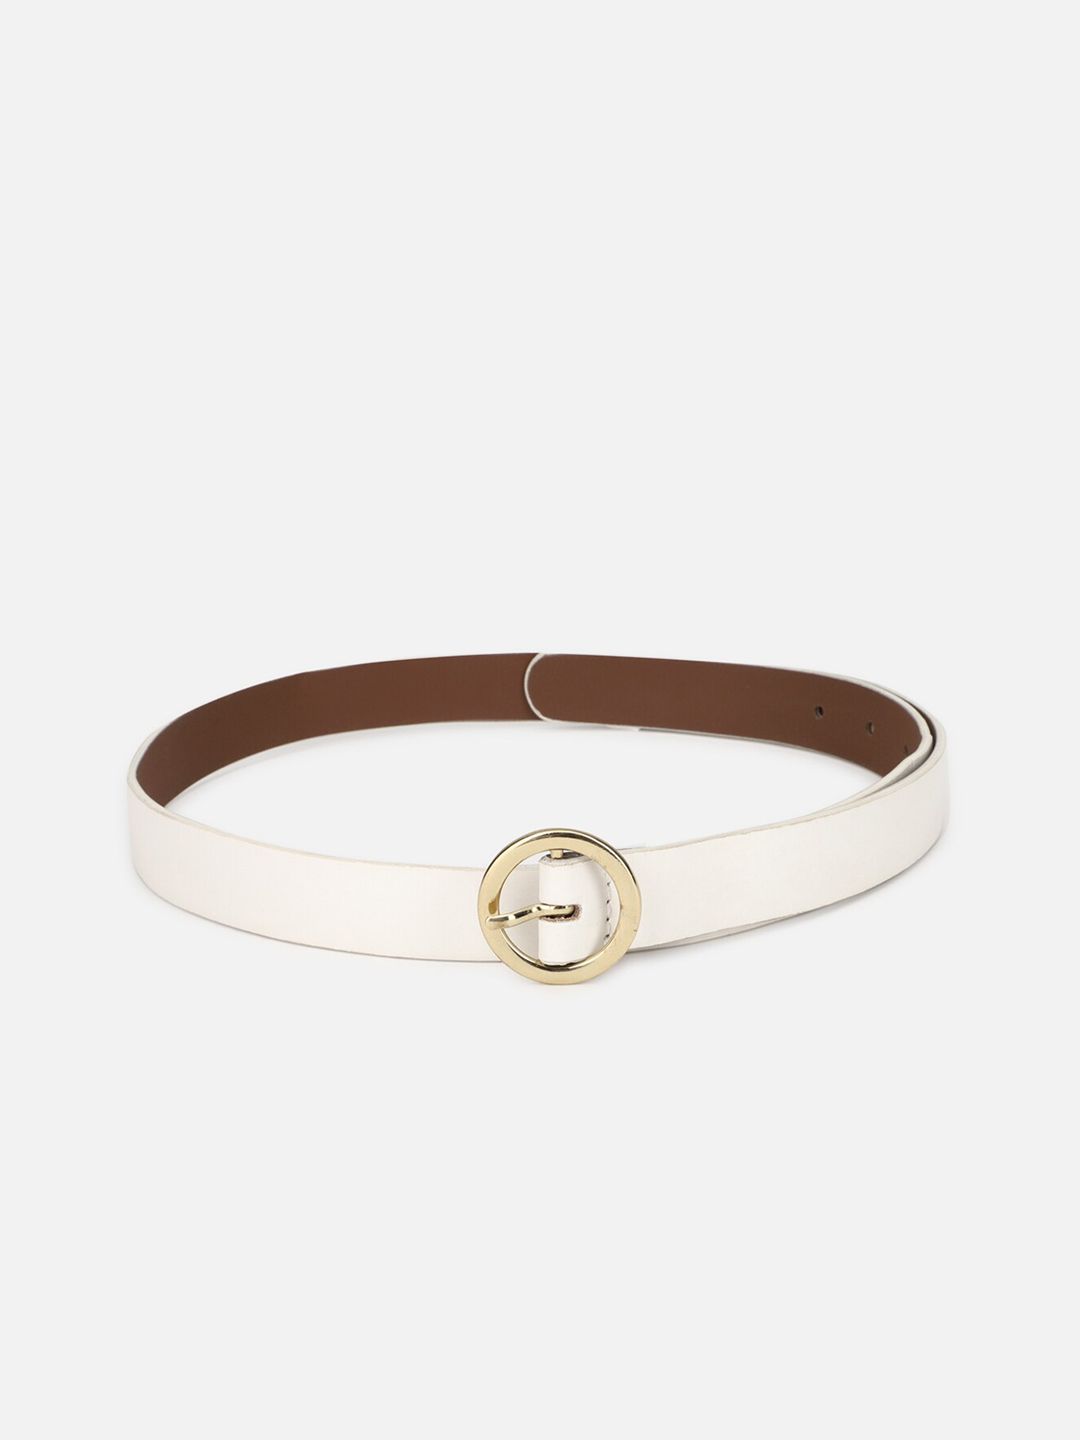 FOREVER 21 Women White PU Belt Price in India